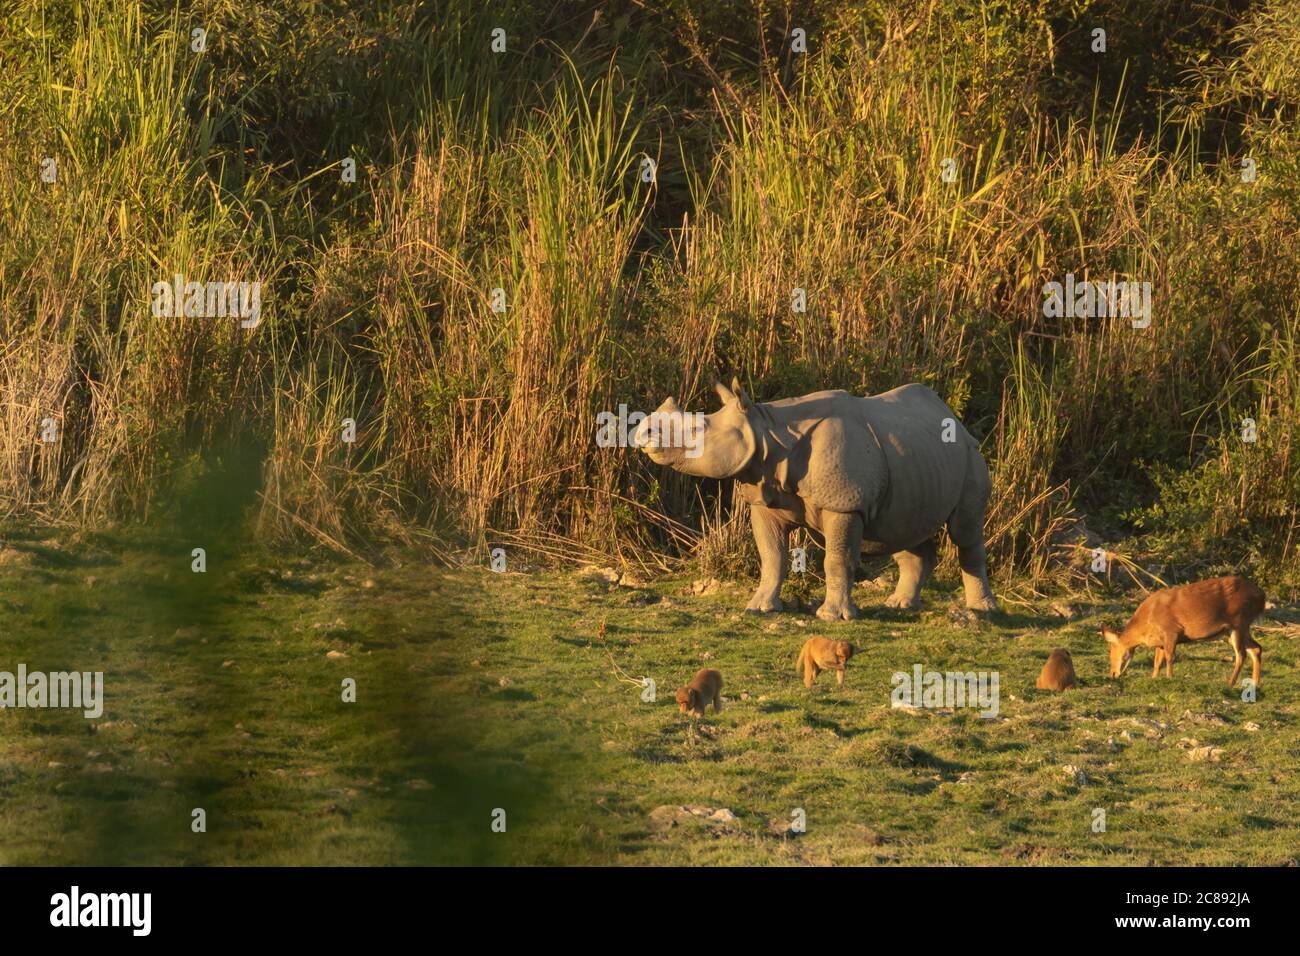 A one horned rhino standing amidst tall grass with other animals in a national park in Assam India Stock Photo